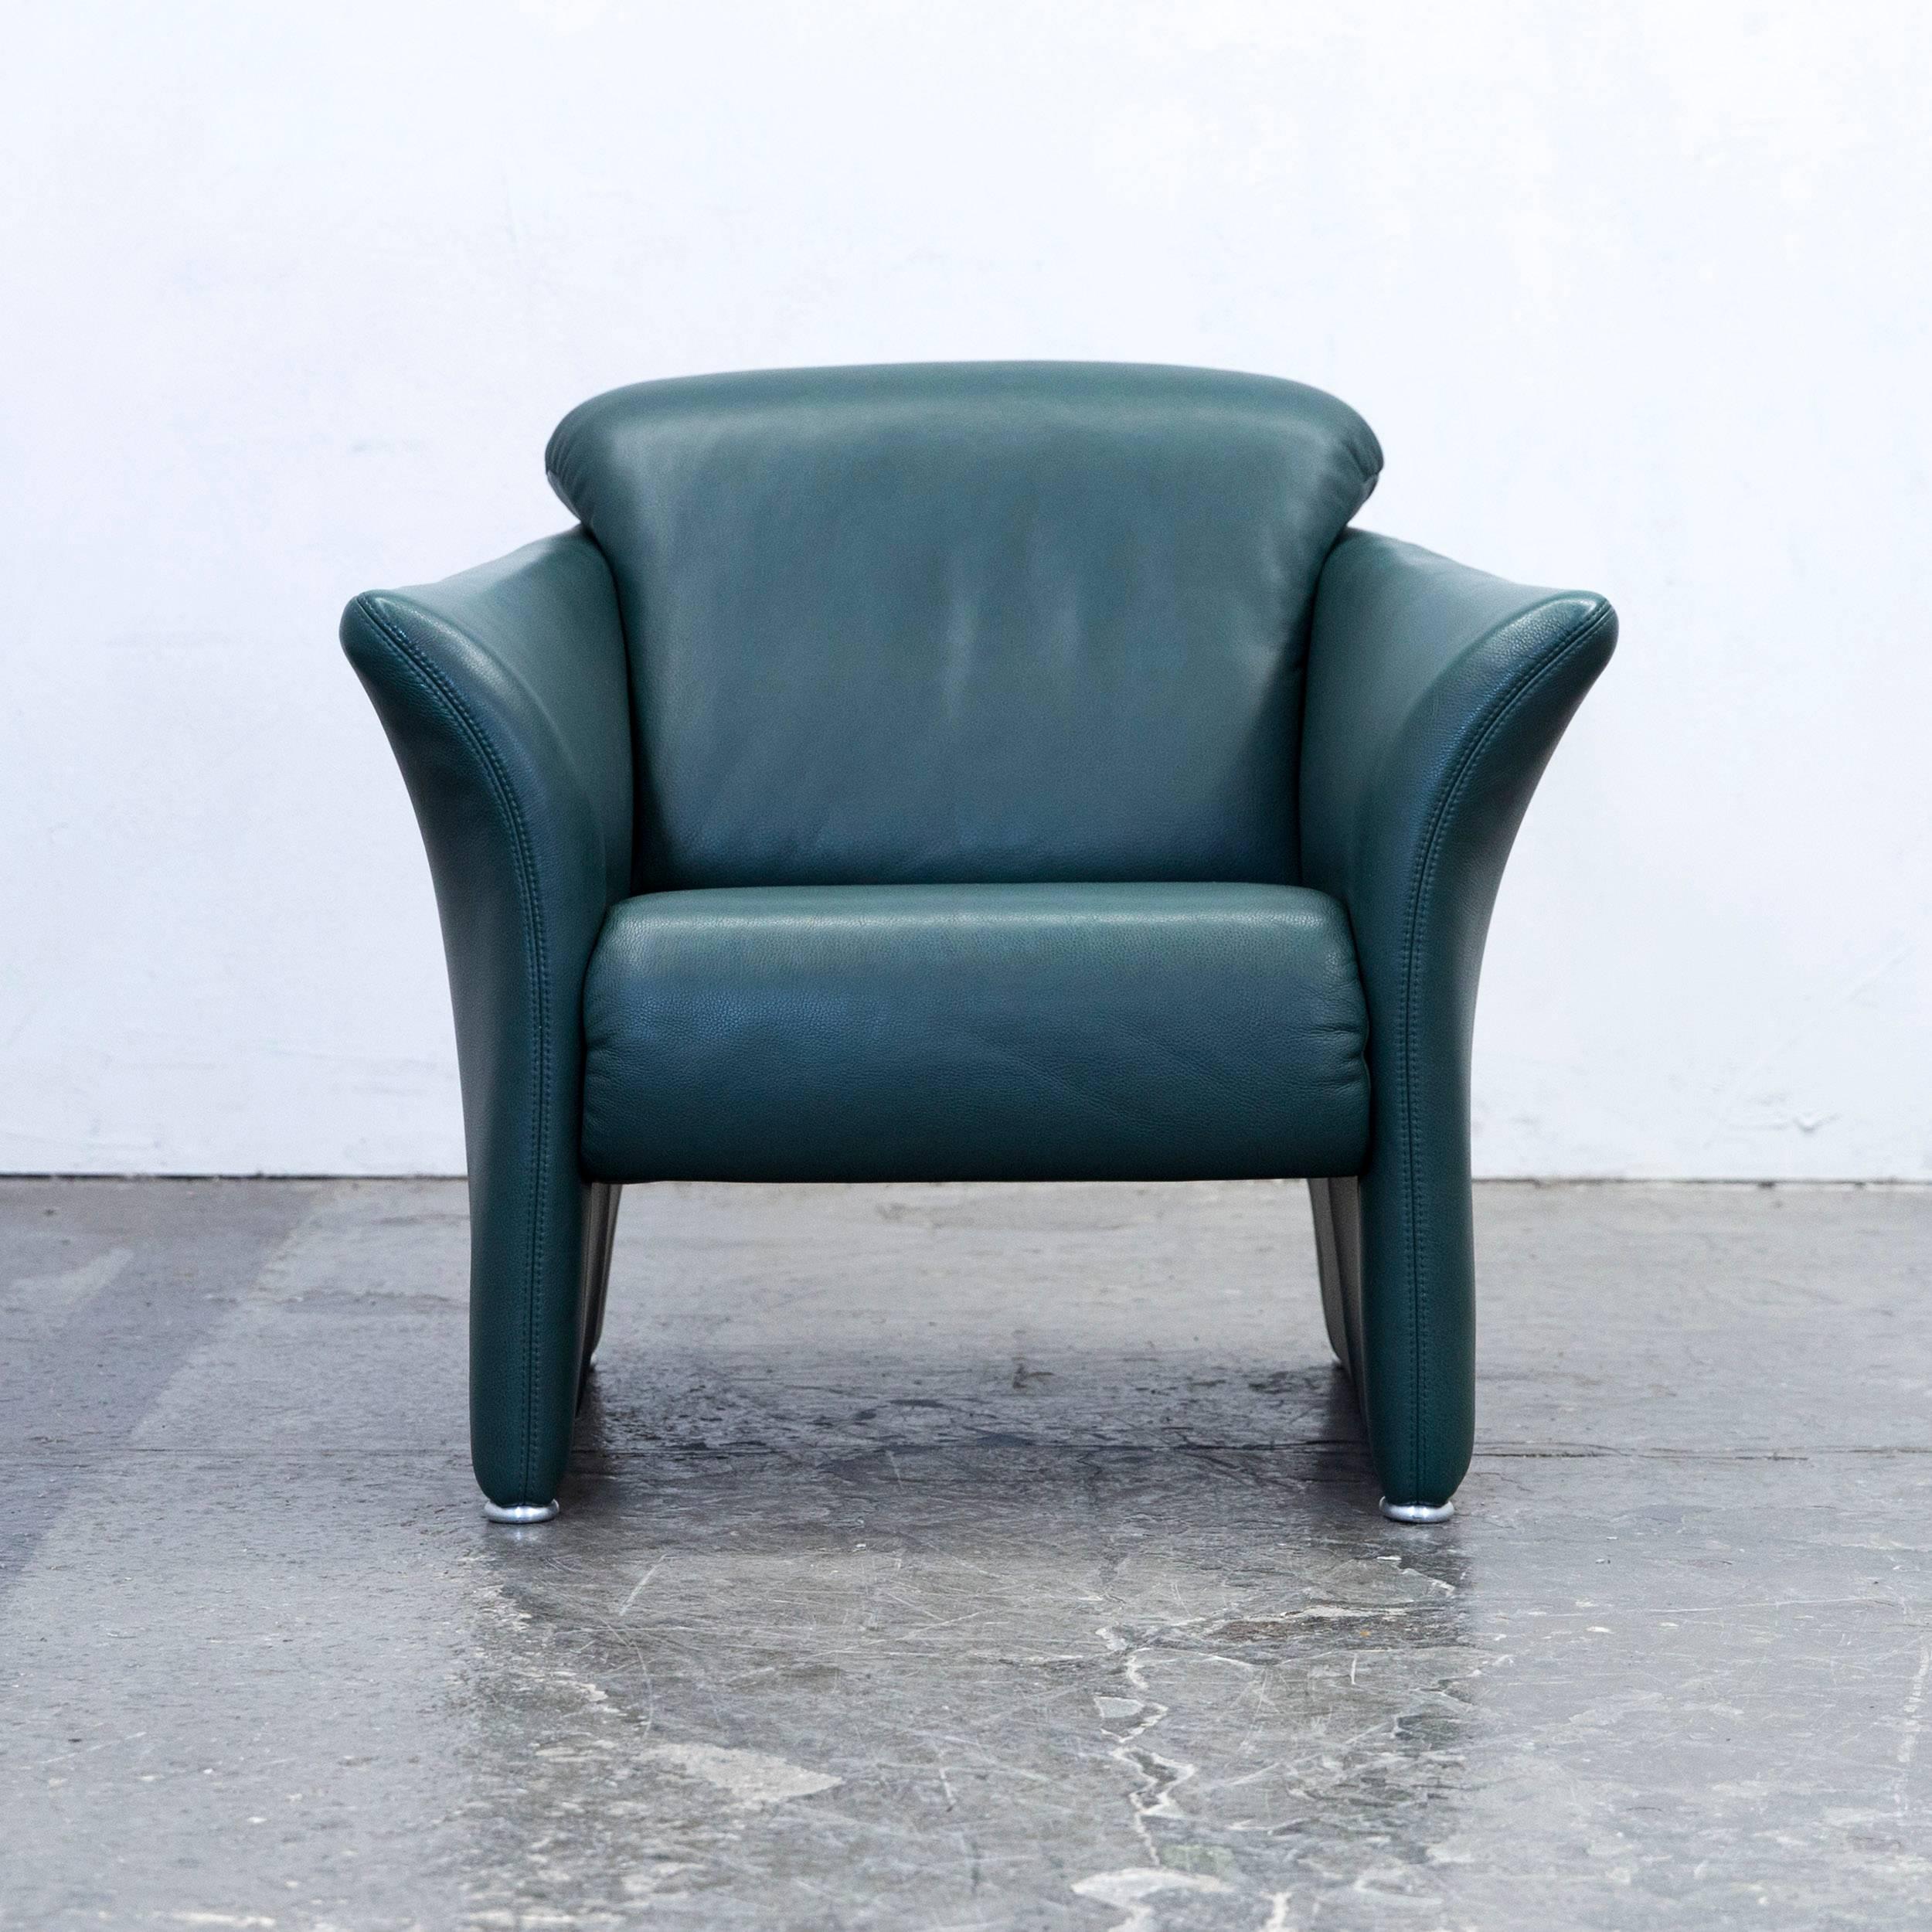 Green colored original Koinor designer leather armchair, in a minimalistic and modern design, made for pure comfort and style.